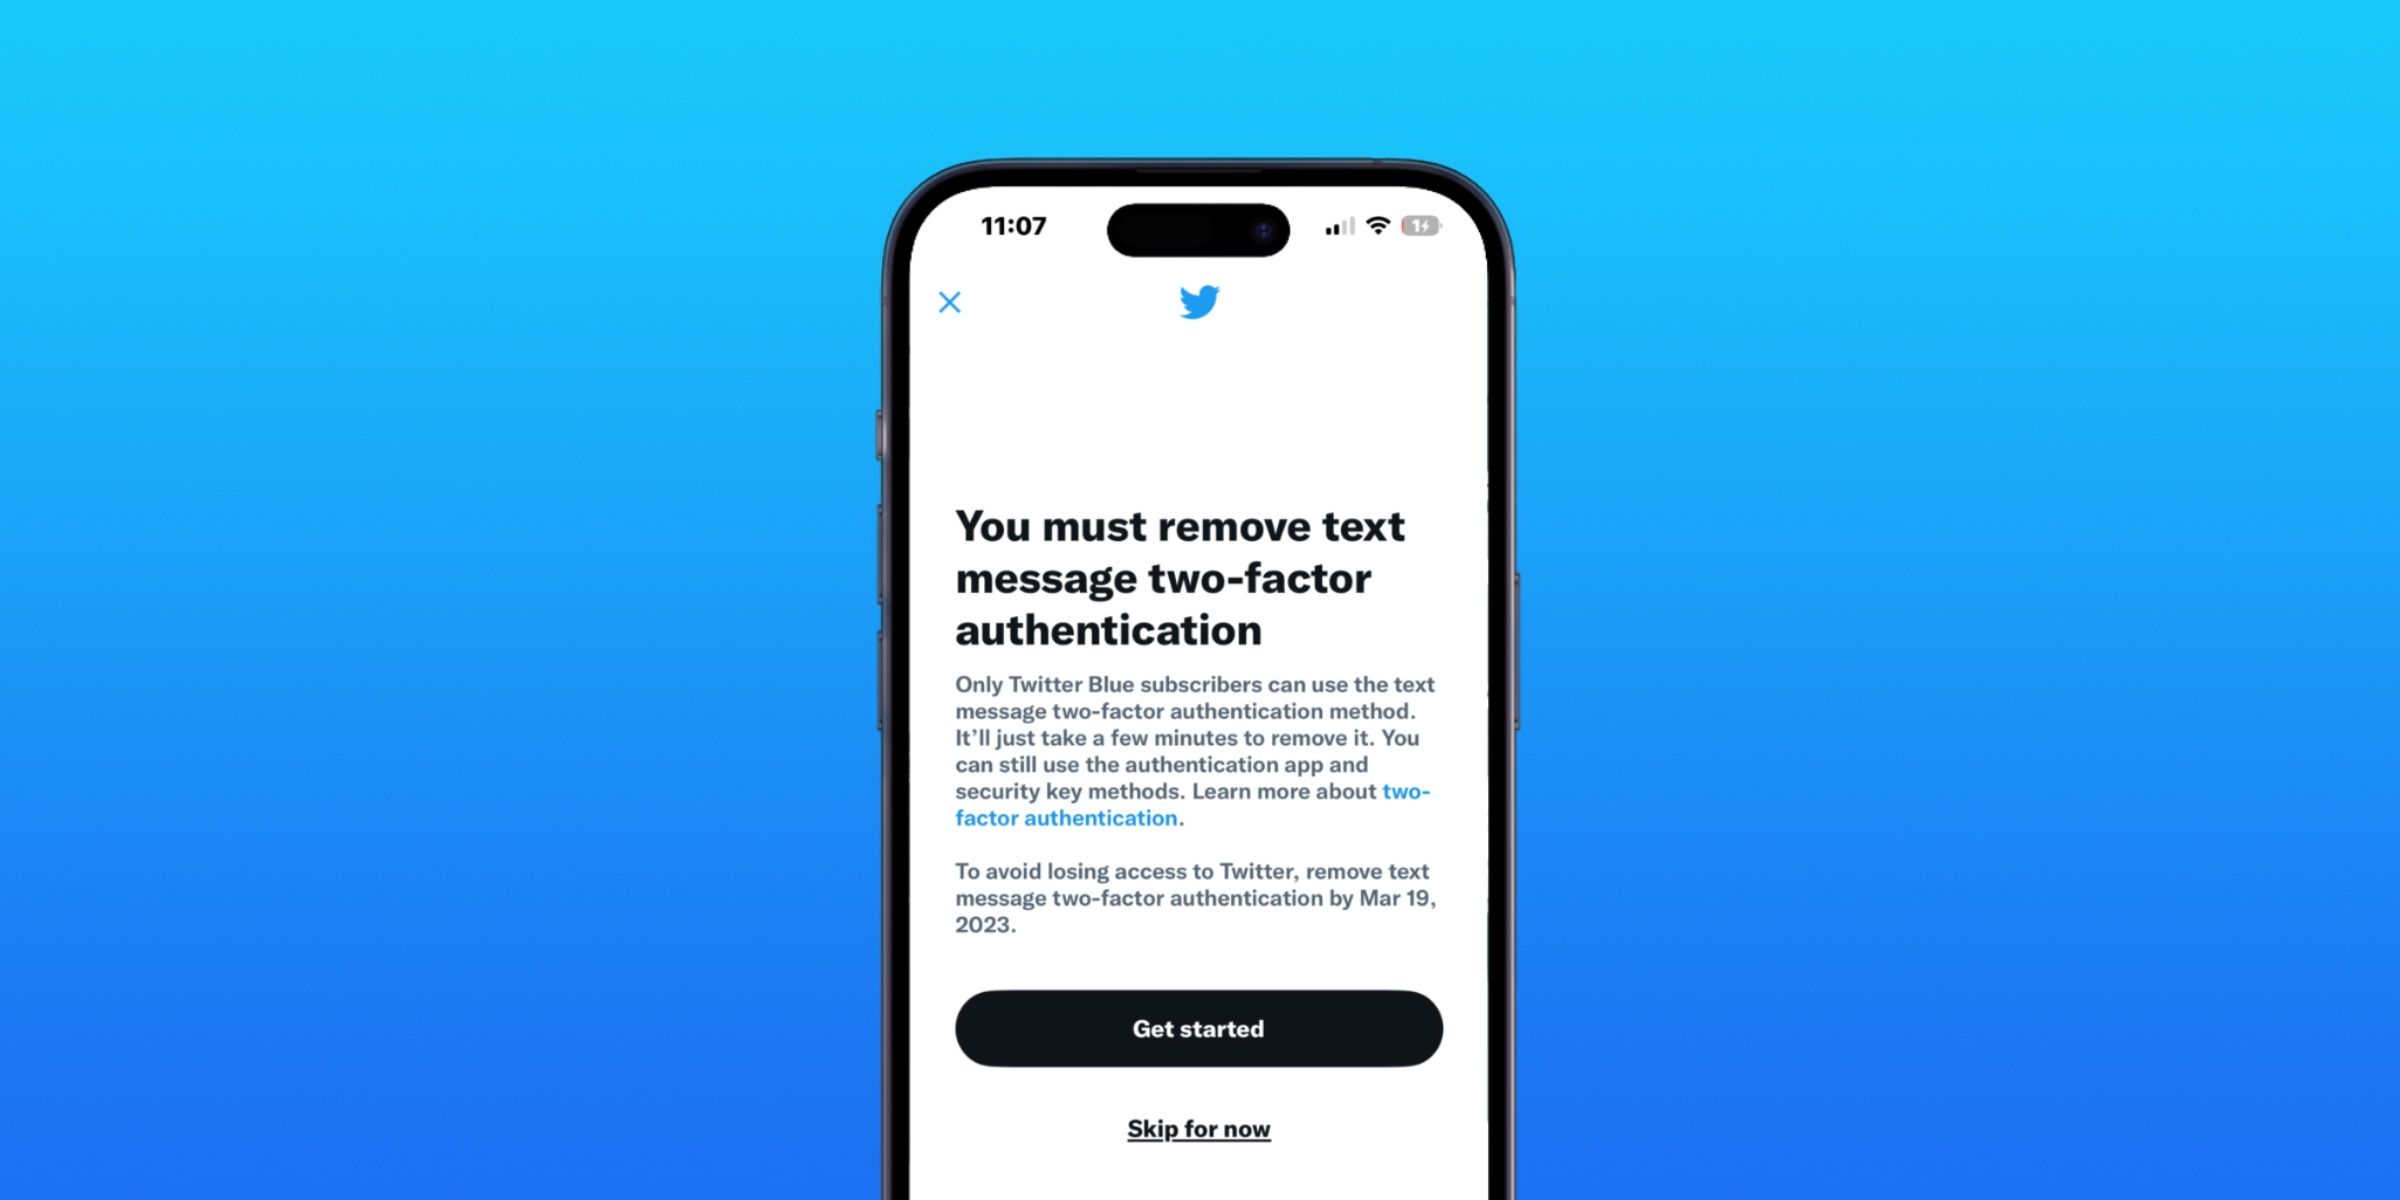 Twitter's two-factor authentication message on an iPhone 14 Pro.